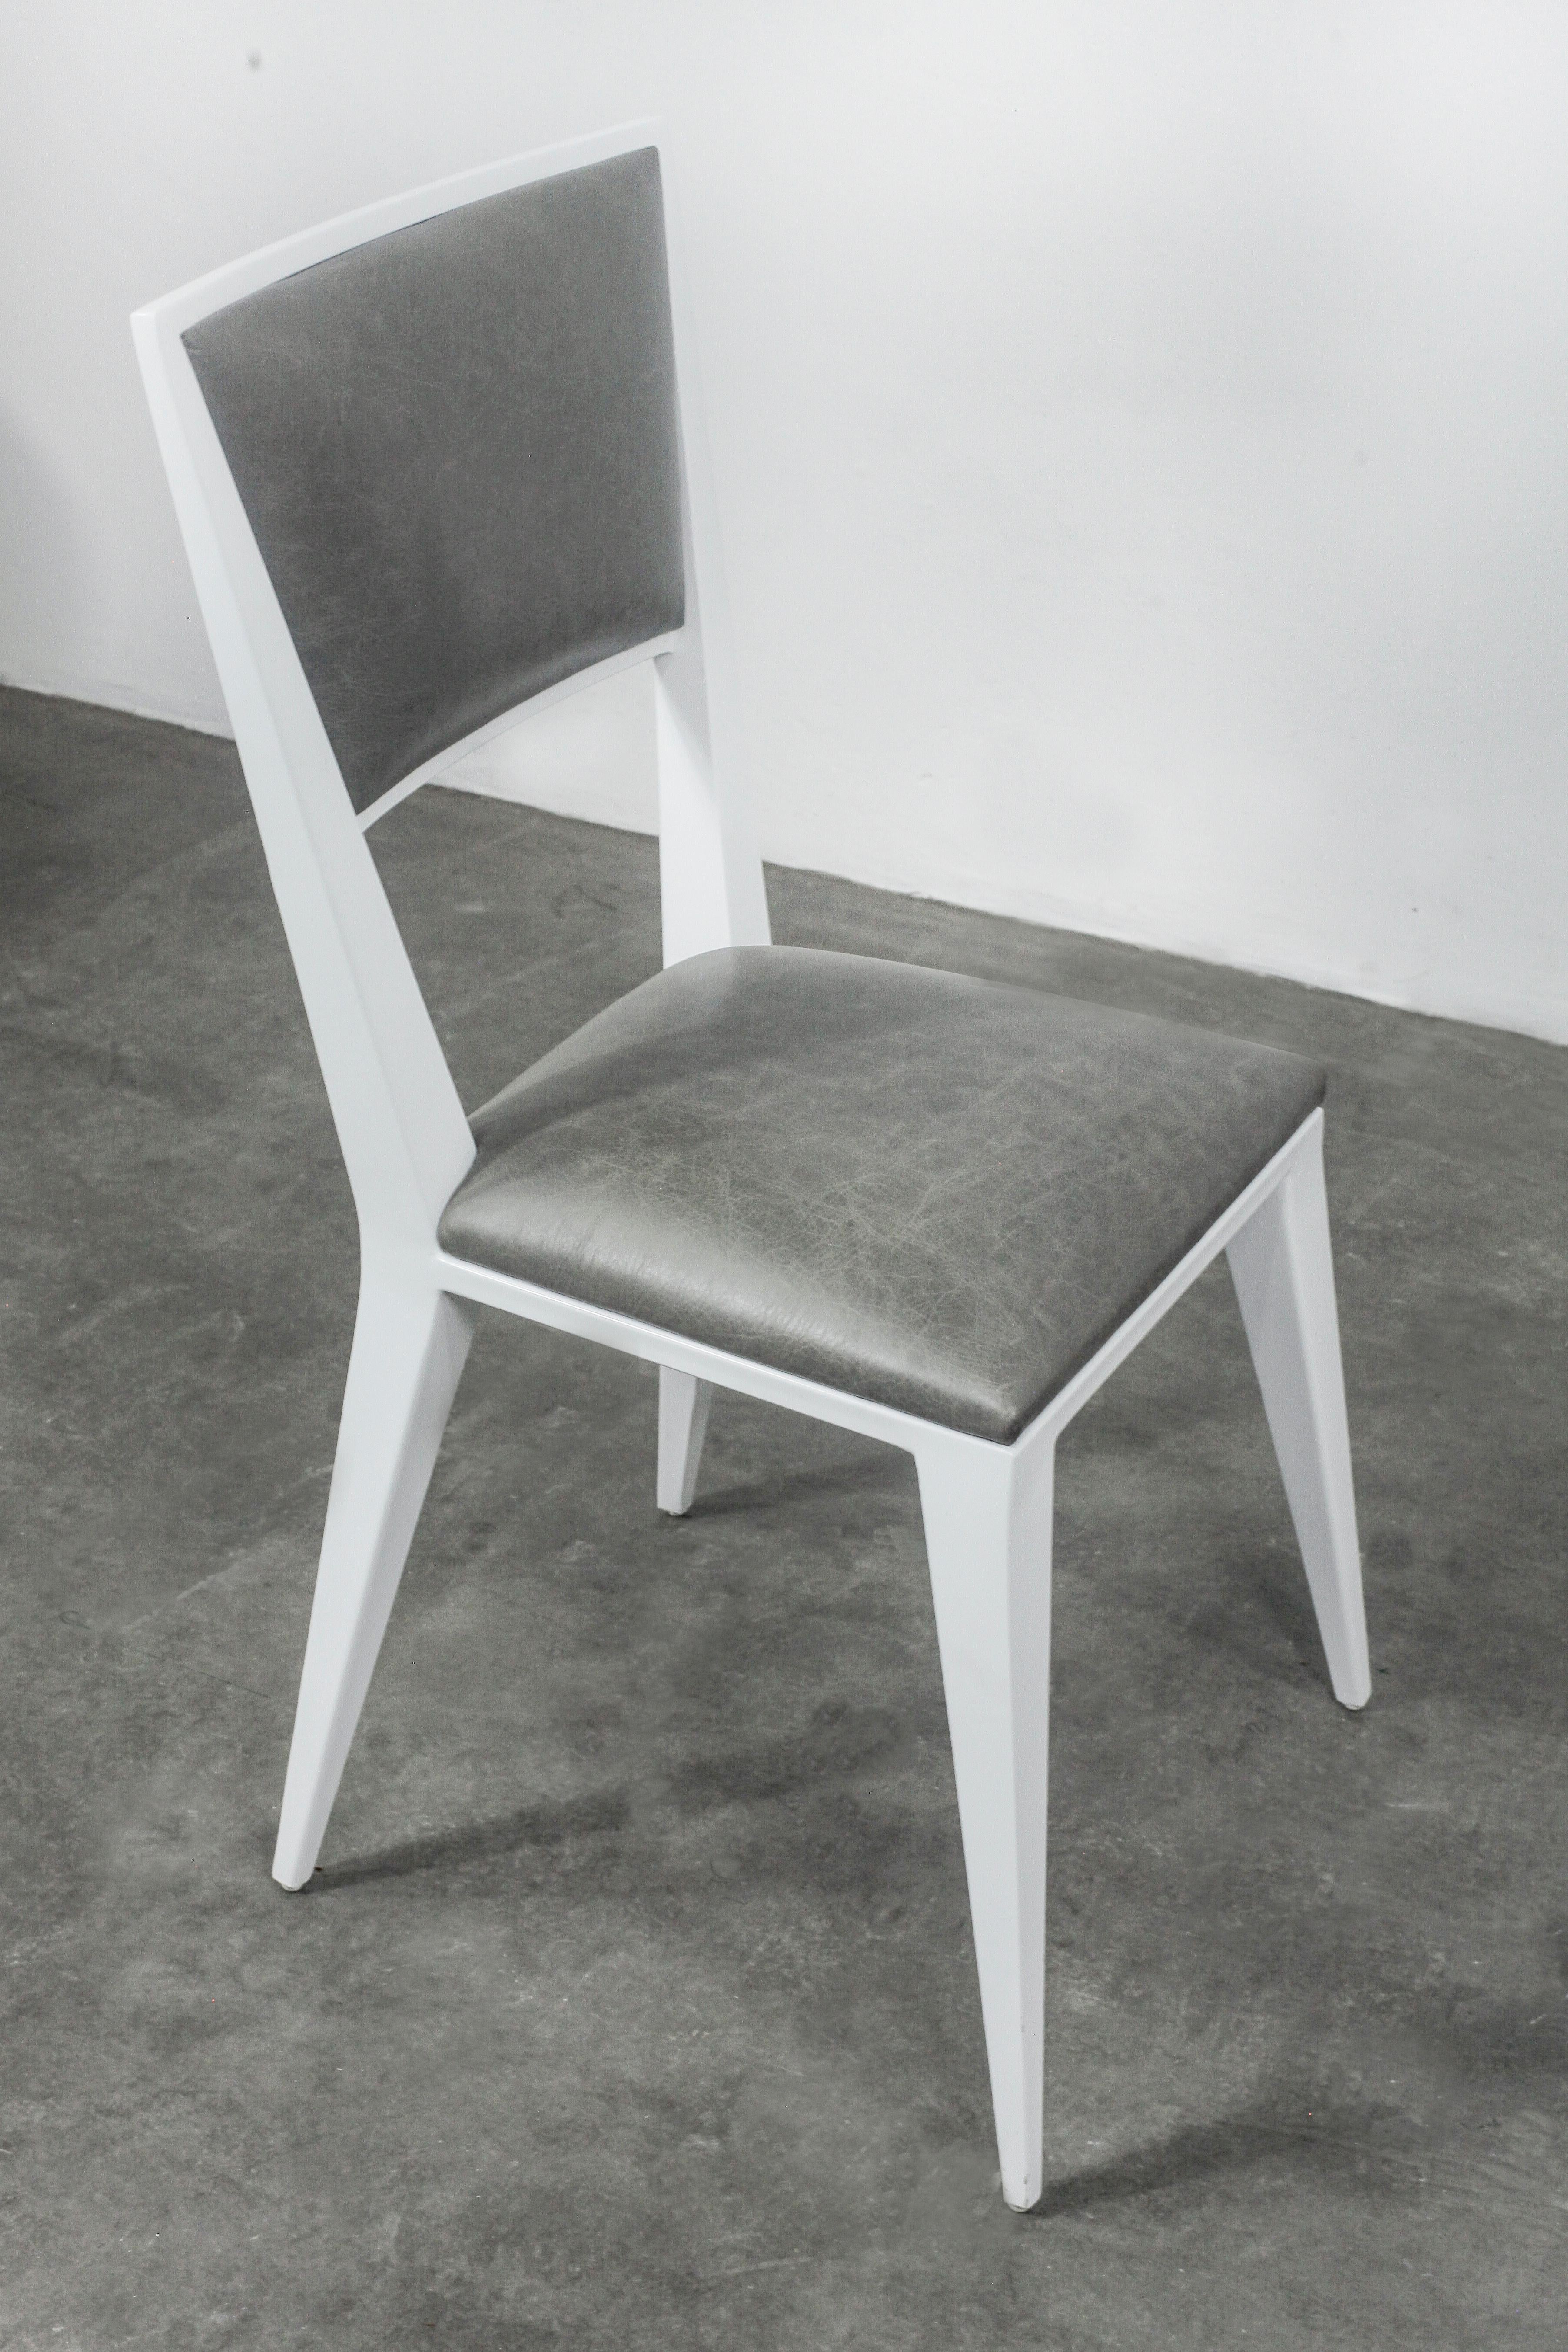 Argentine Lacquered Metal and Leather Chair from Costantini, Rodelio Bianco, In Stock For Sale